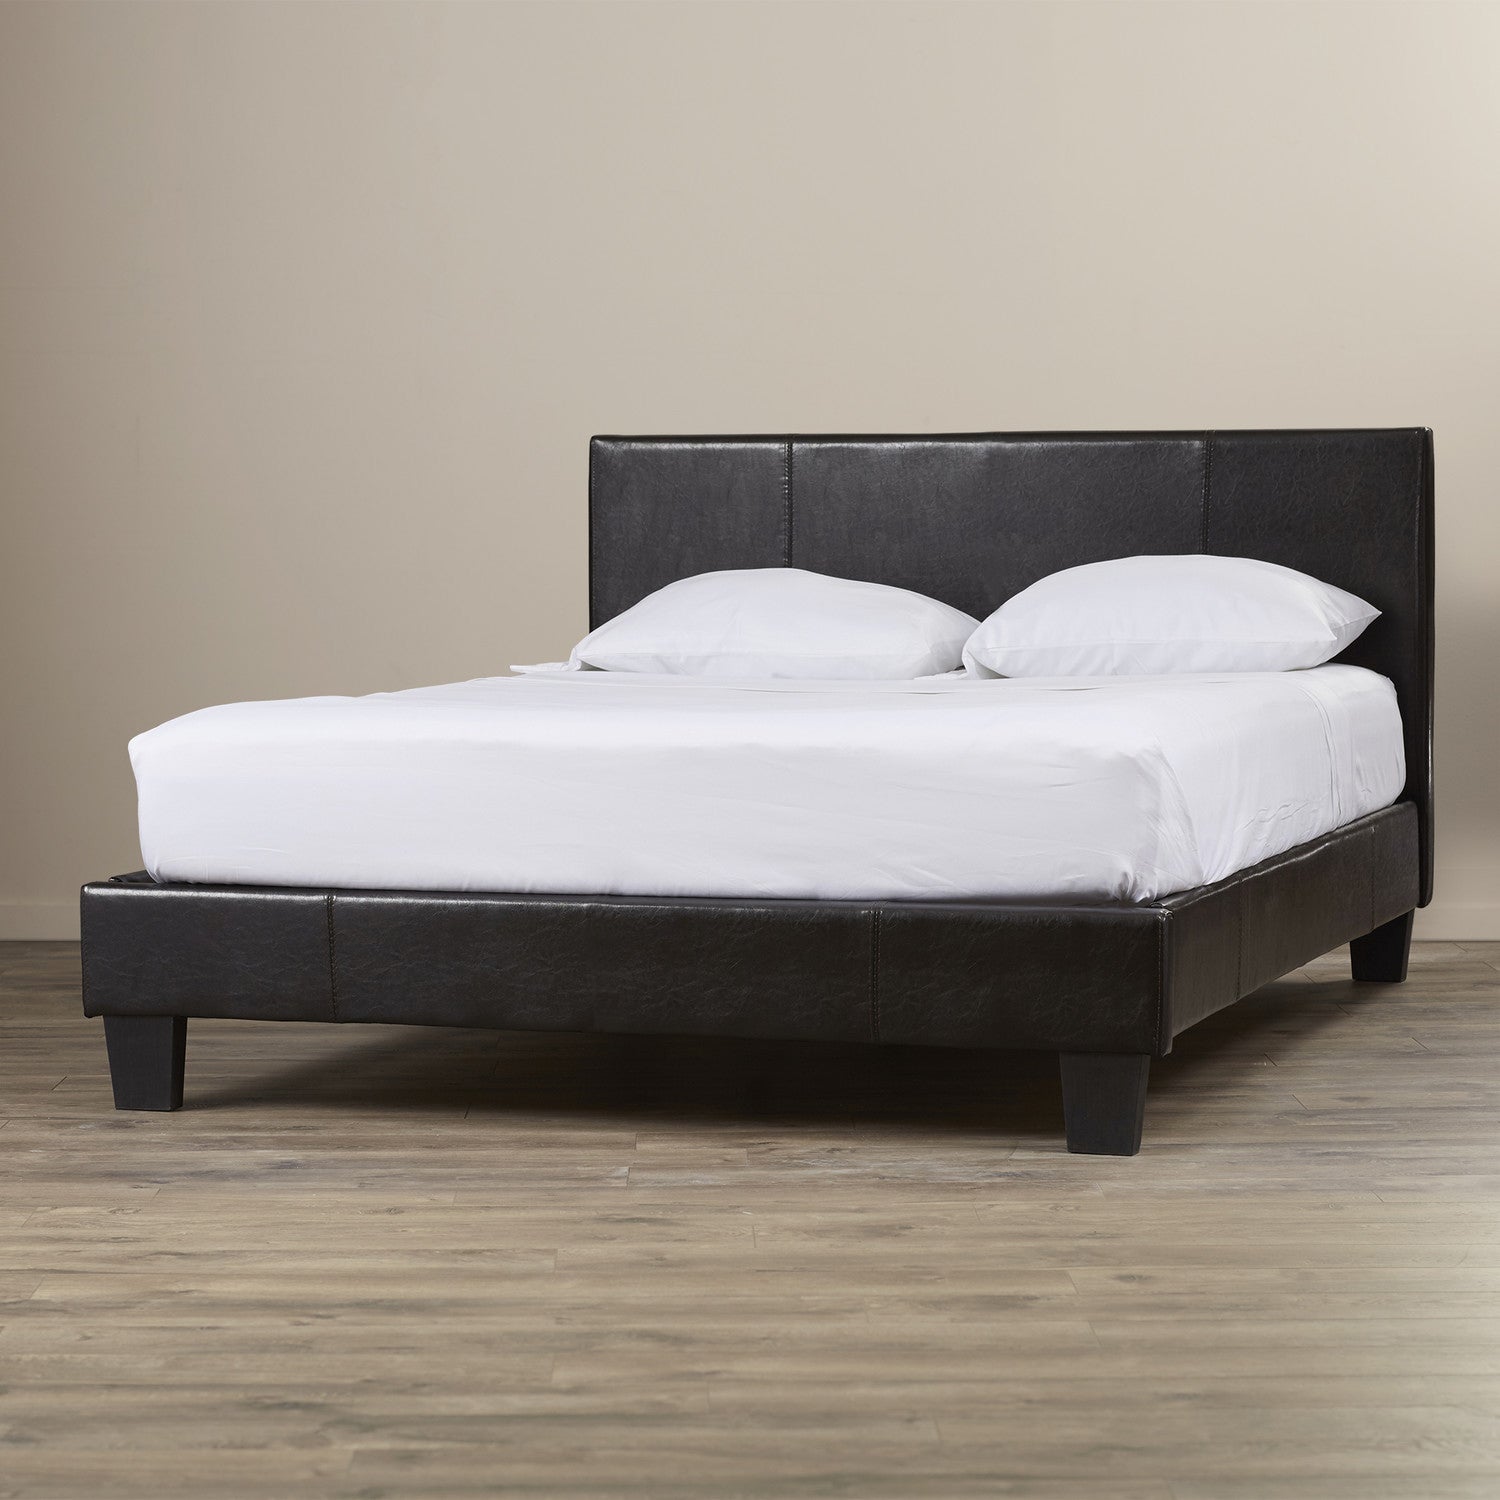 Queen Size Leatheratte Bed Frame in Black Colour with Metal Joint Slat Base